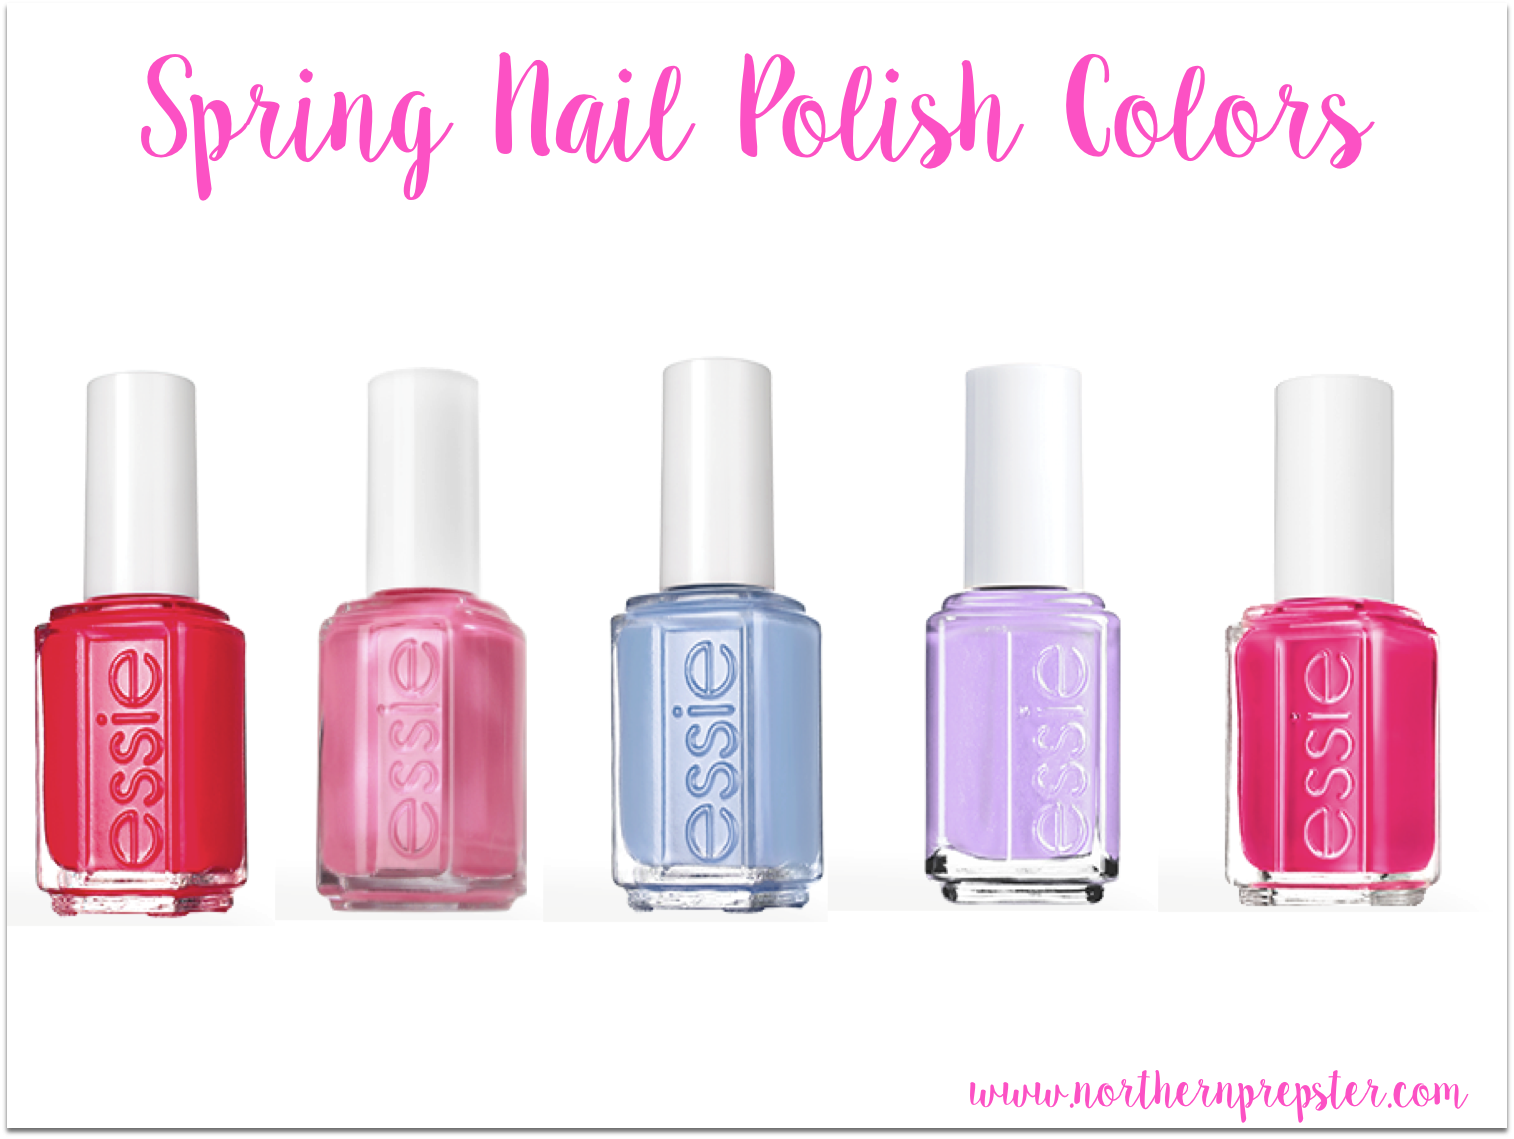 8. "The Hottest Nail Polish Colors for Spring 2021" - wide 8